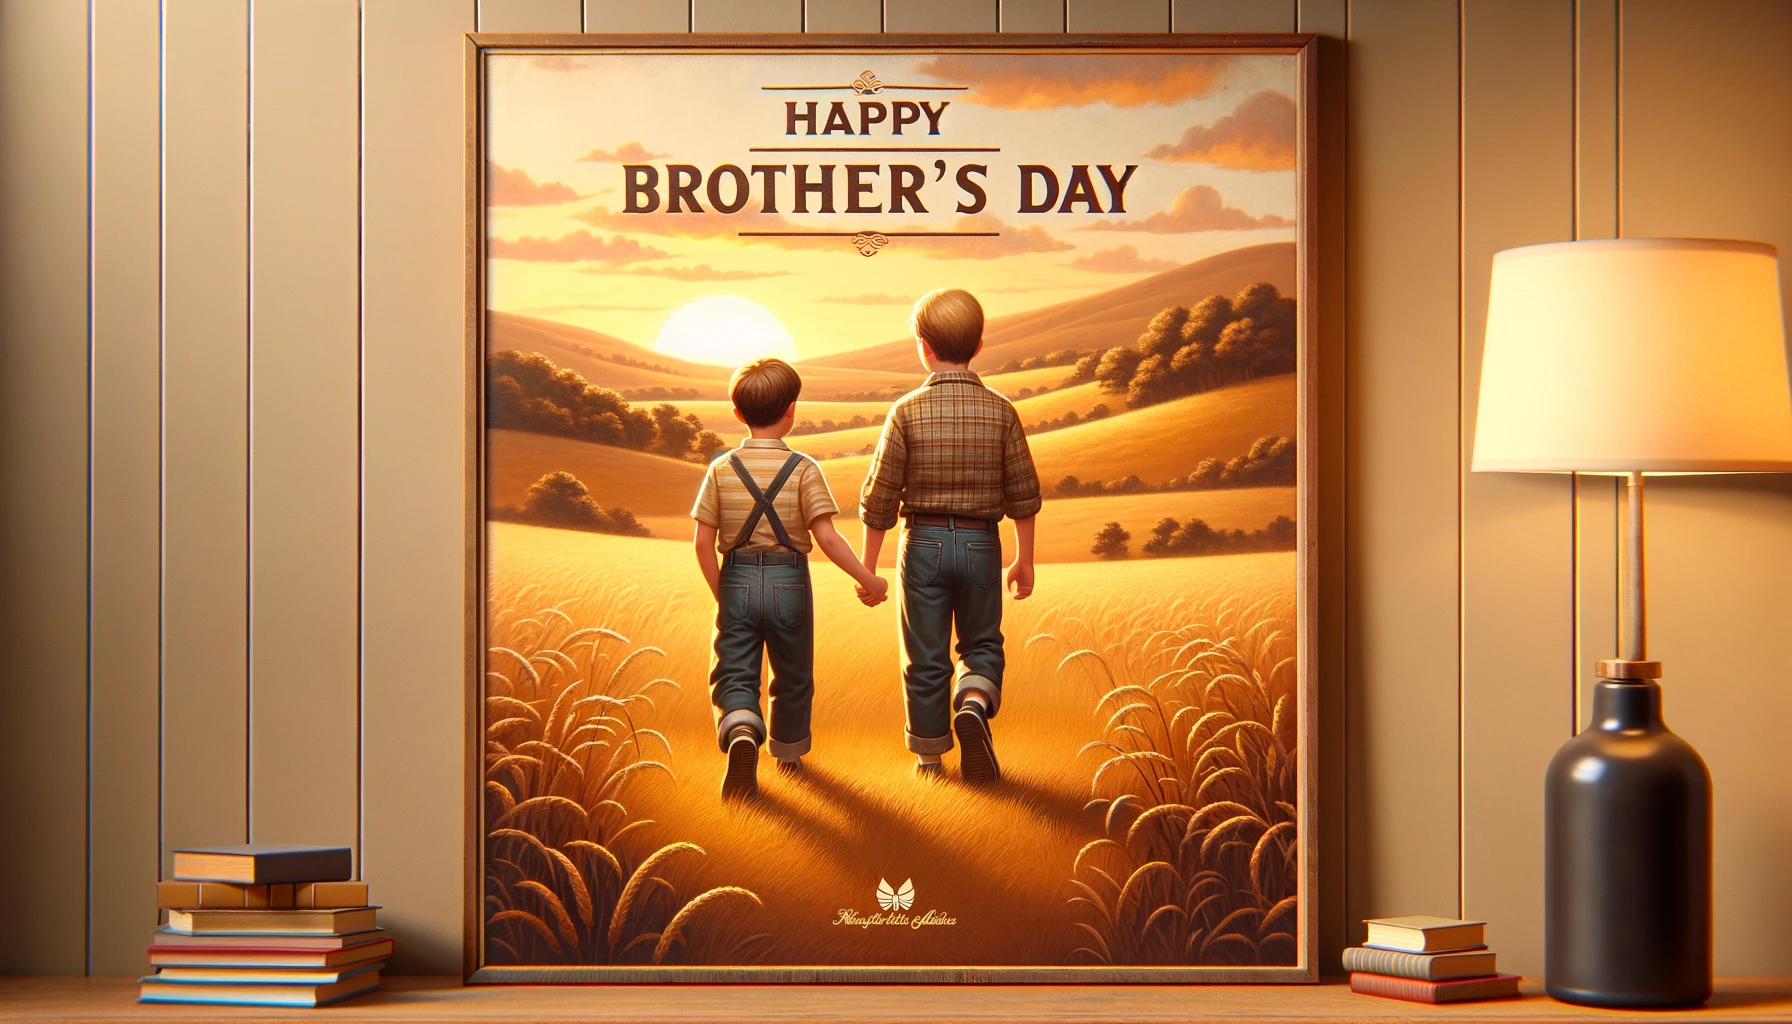 Funny Brother's Day Messages for Laughs